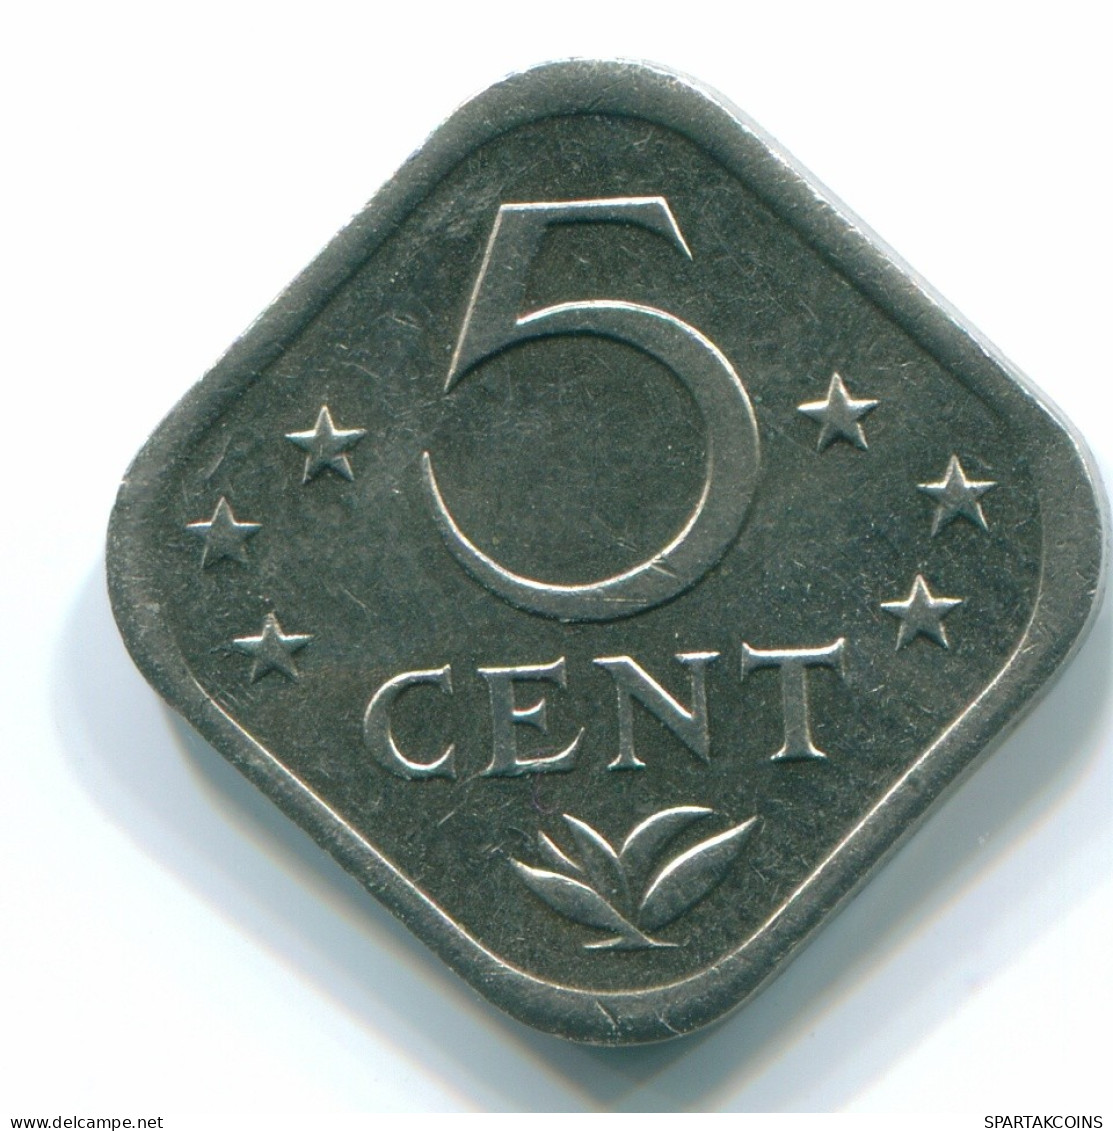 5 CENTS 1982 NETHERLANDS ANTILLES Nickel Colonial Coin #S12351.U.A - Netherlands Antilles